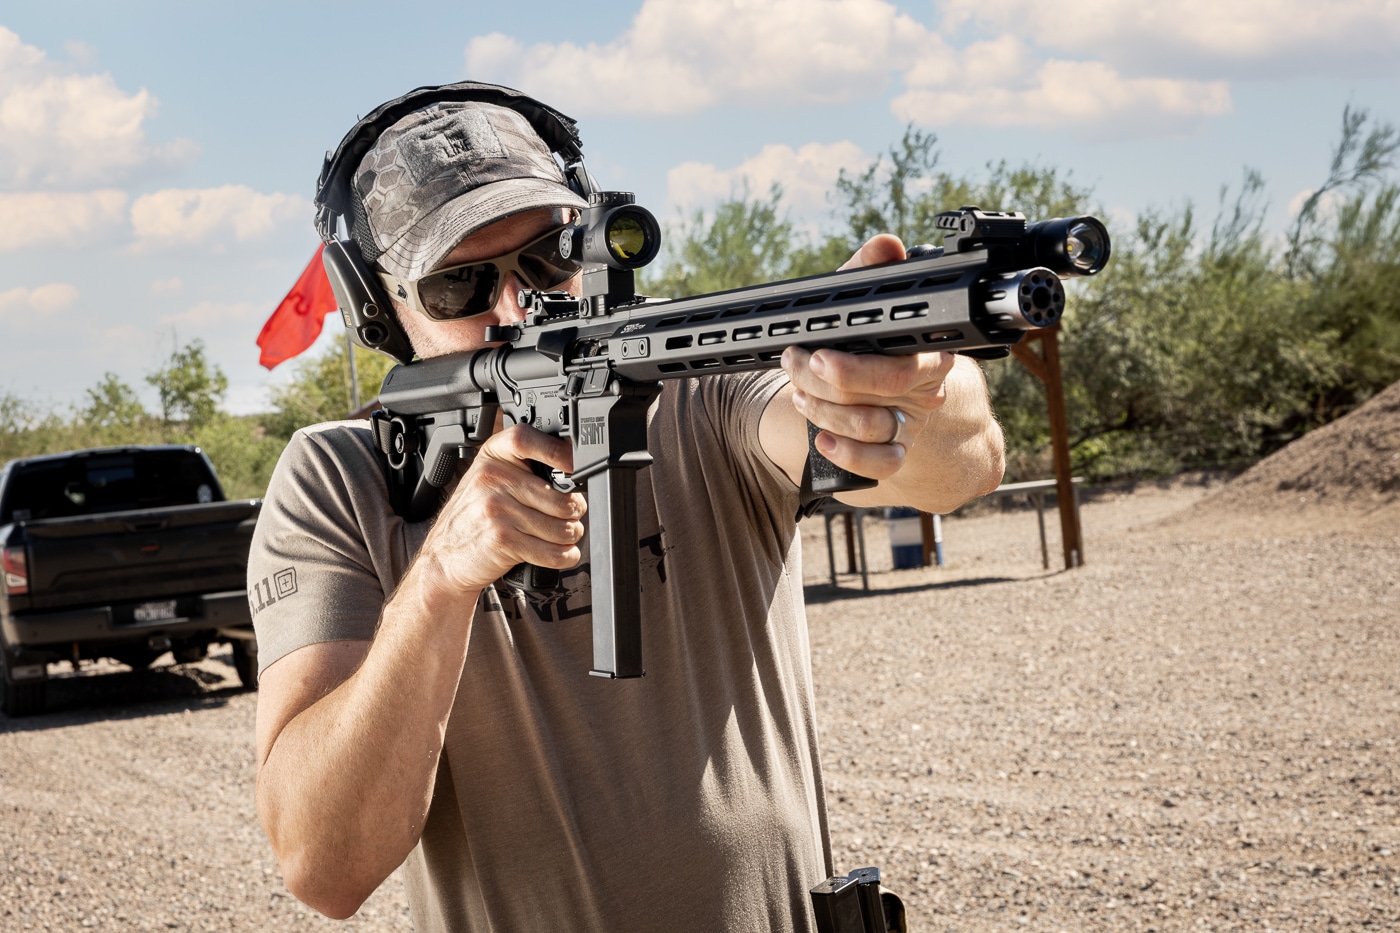 testing the springfield 9mm carbine on the range